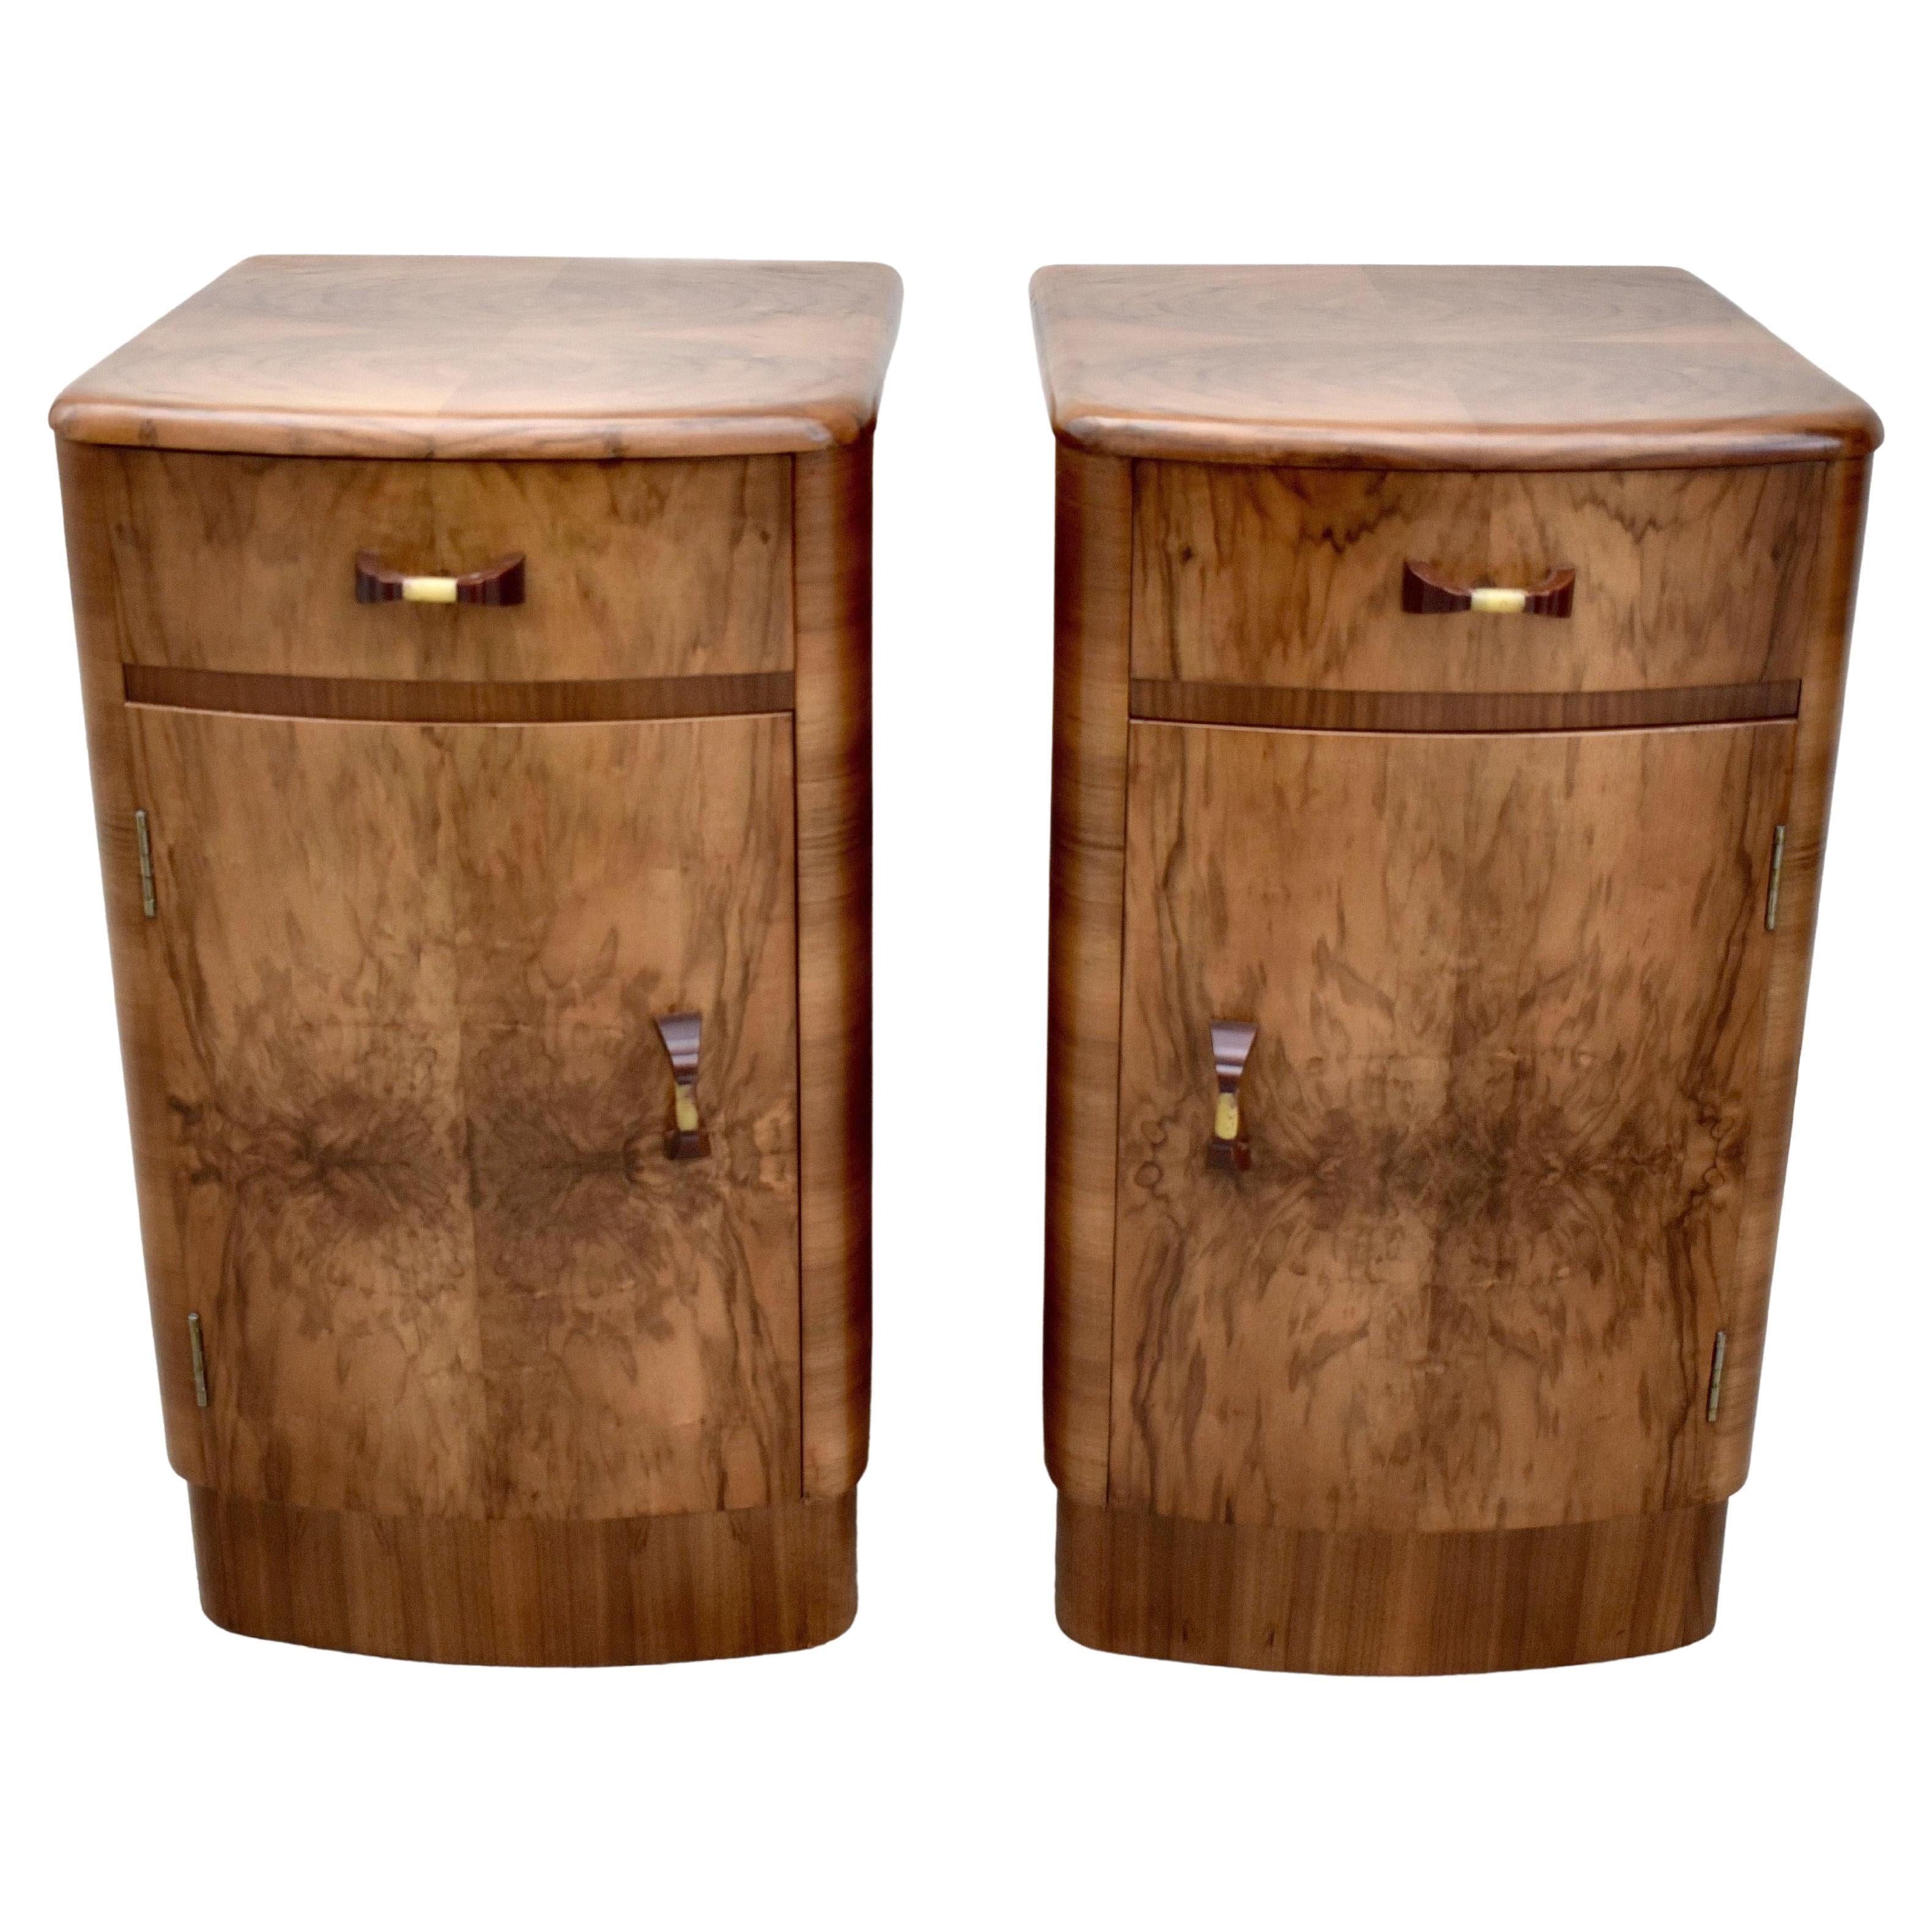 Art Deco Matching Pair of Walnut Bedside Cabinets Night Stands, English, c 1930